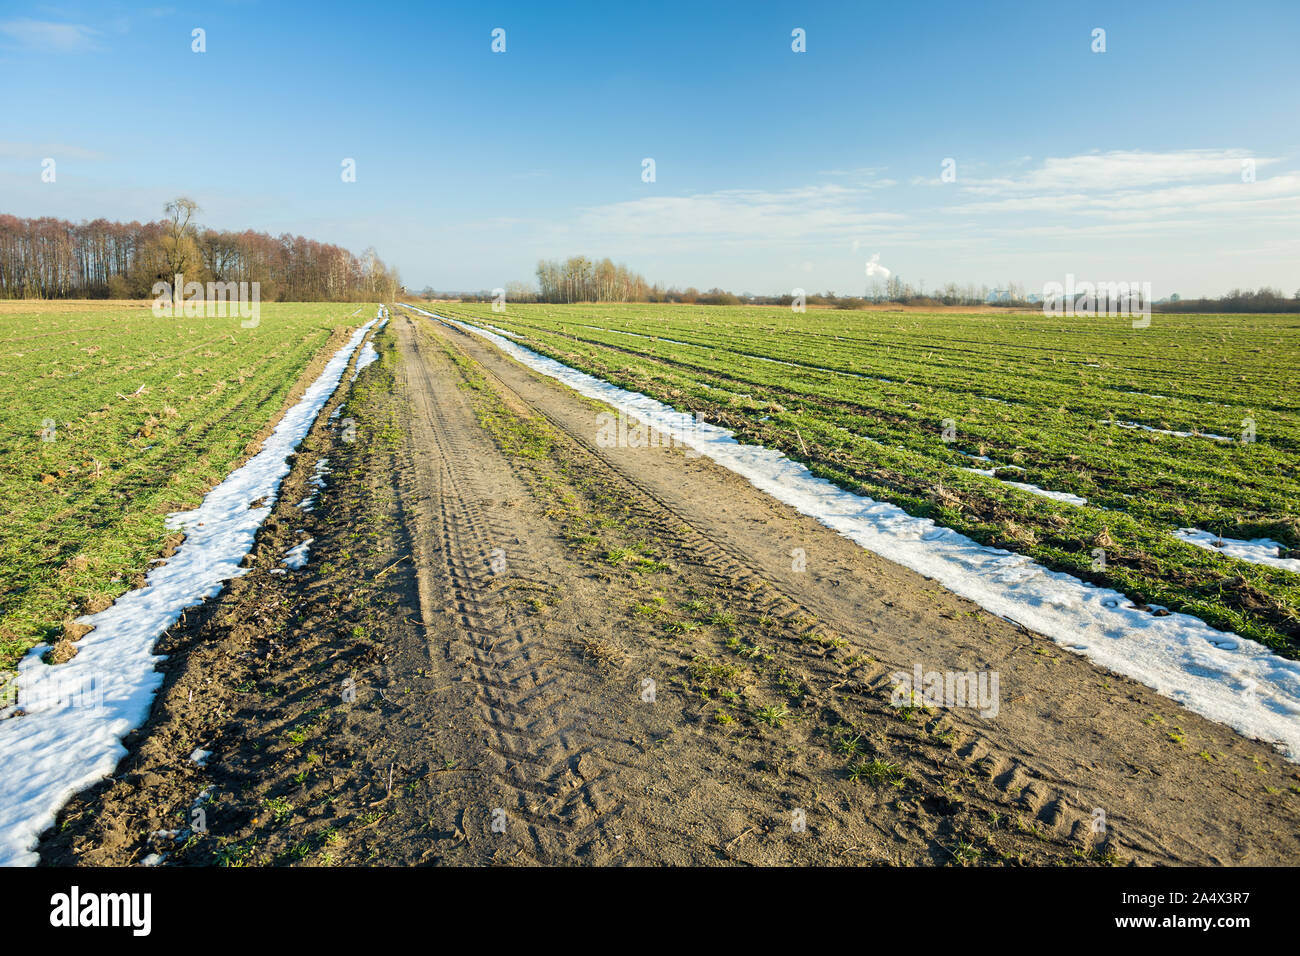 Snow on the side of a dirt road, green fields, blue sky Stock Photo